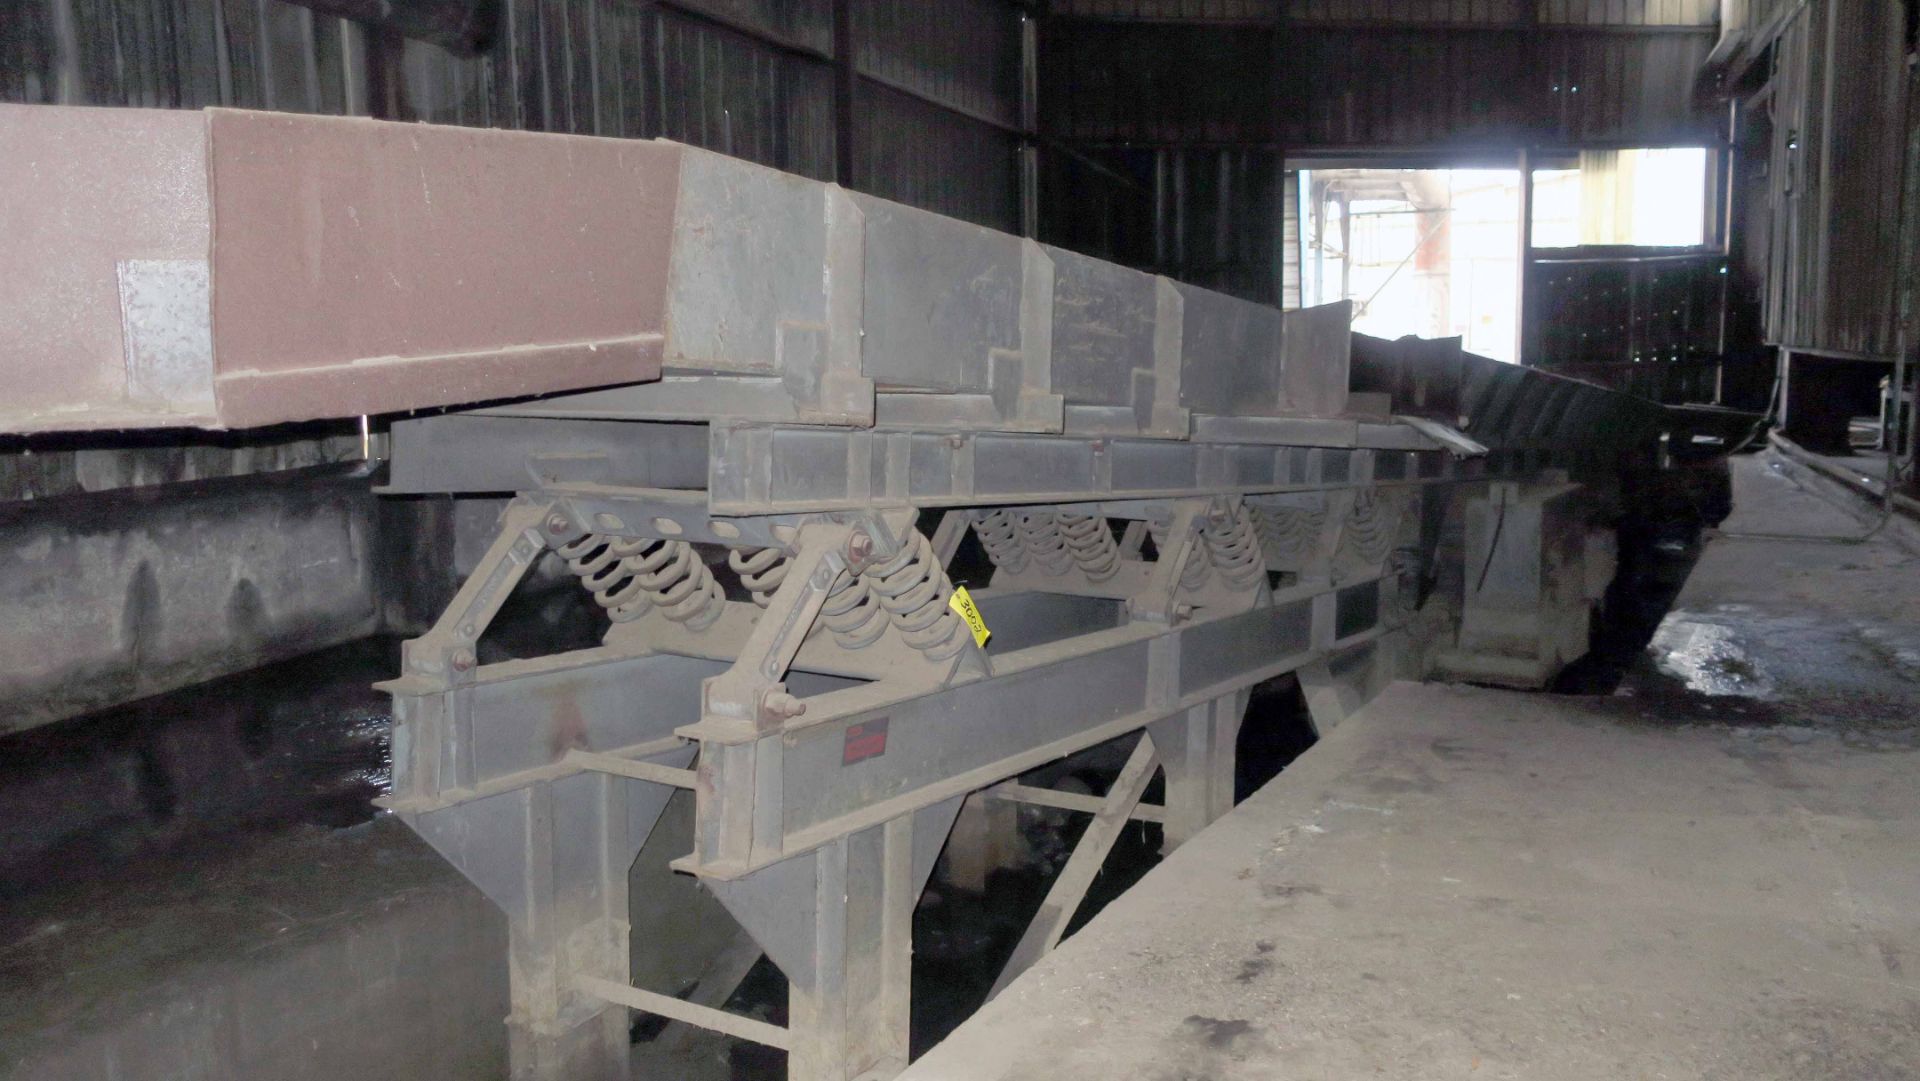 INCLINED VIBRATORY PAN CONVEYOR, CARRIER, approx. 60' x 48"W. x 14" dp. (Location F: 2412 Eulaton